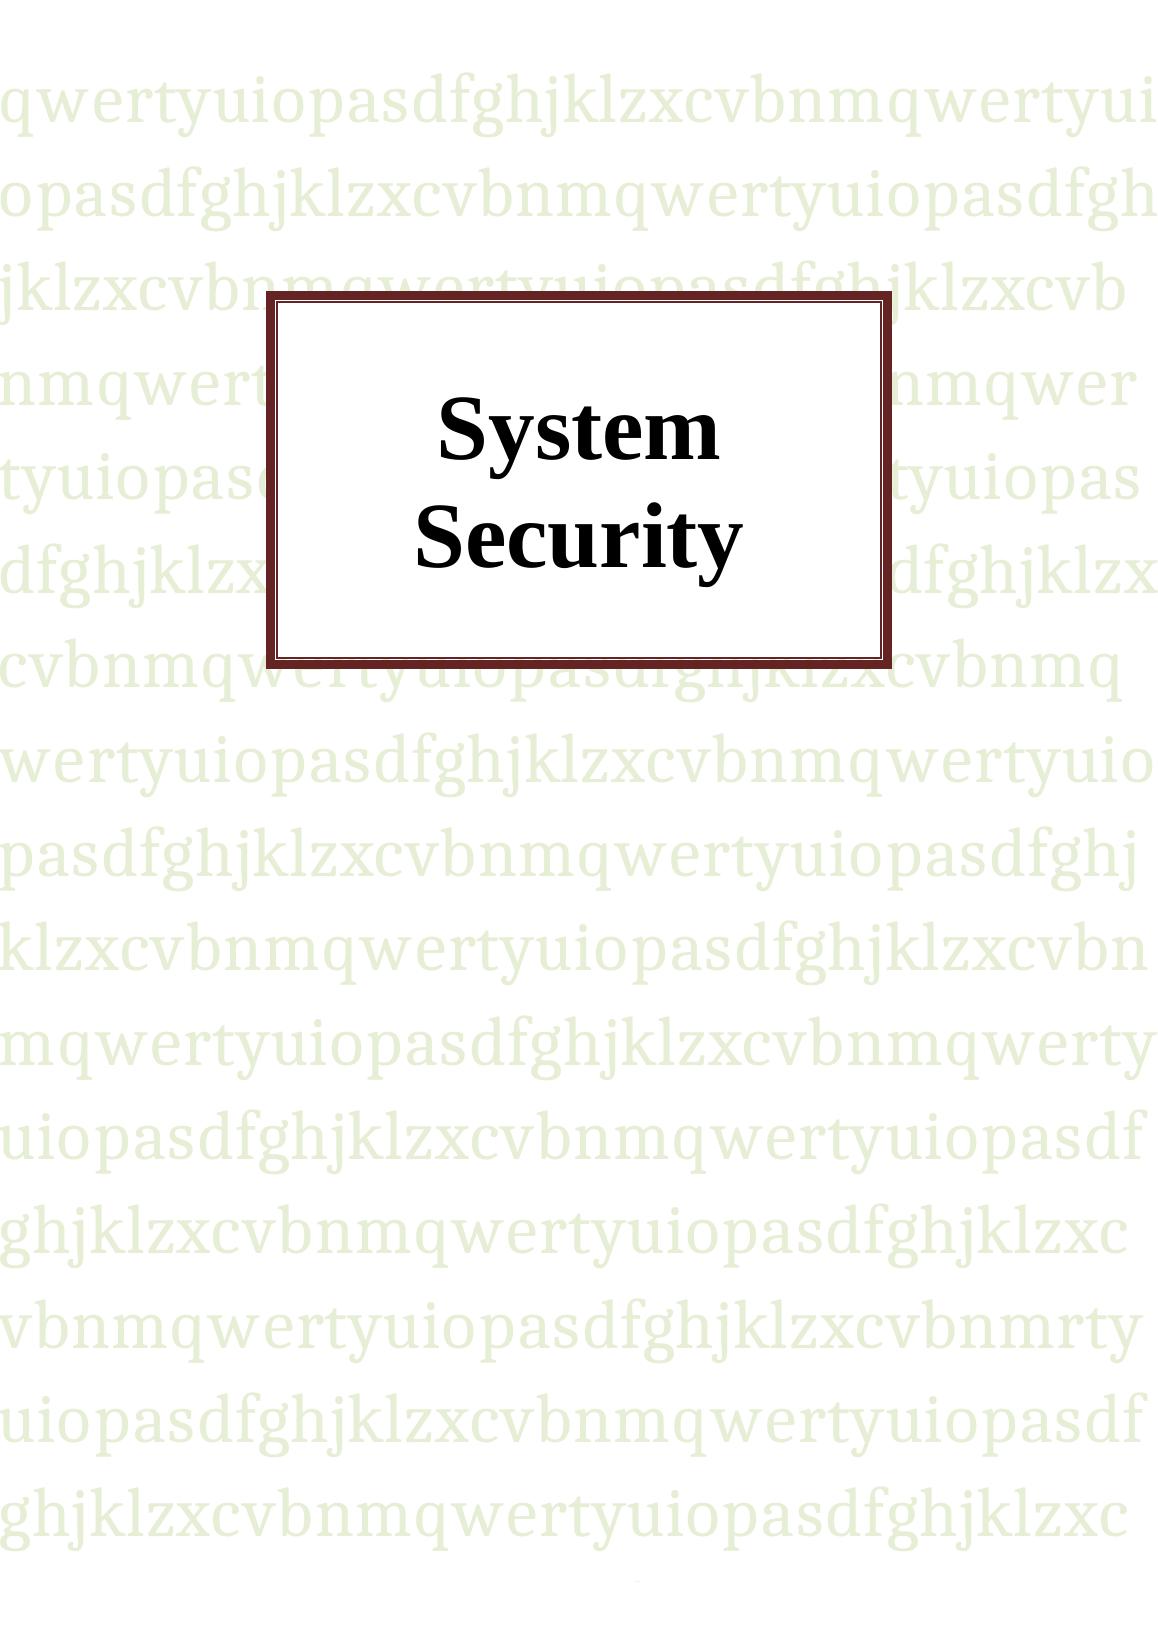 Assignmnet On System Security - ITC595_1